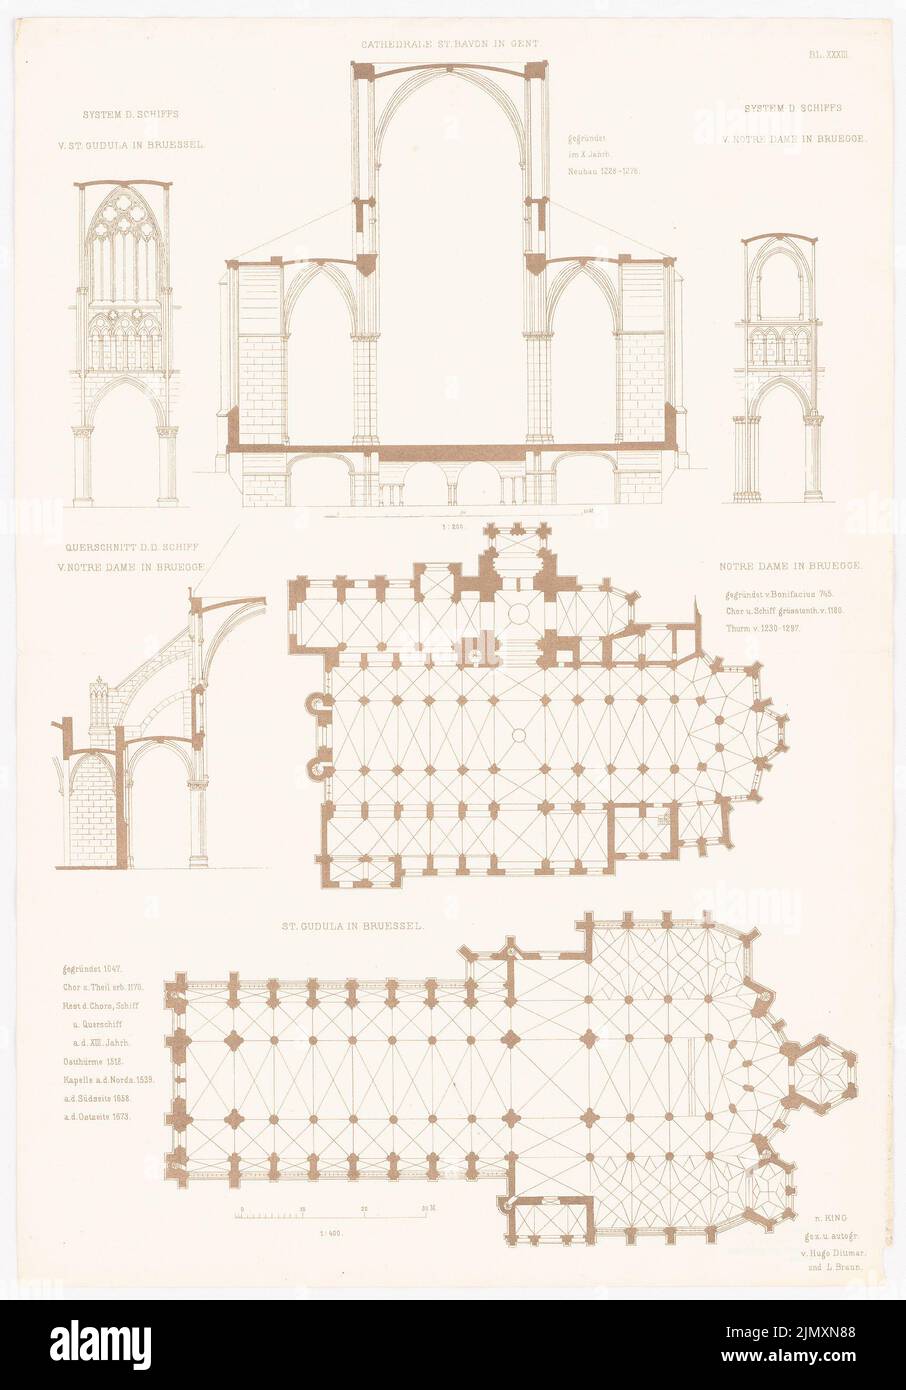 N.N., Kathedral St. Bavon in Ghent. St. Gundula in Brussels. (From: Gothic architecture in France, ed. V. Character output d. Stud. TH Berlin, 1875) (1875-1875): cross-section, detail, floor plan, details Brugge, floor plan Brussels. Pressure on paper, 52.2 x 36.4 cm (including scan edges) Stock Photo